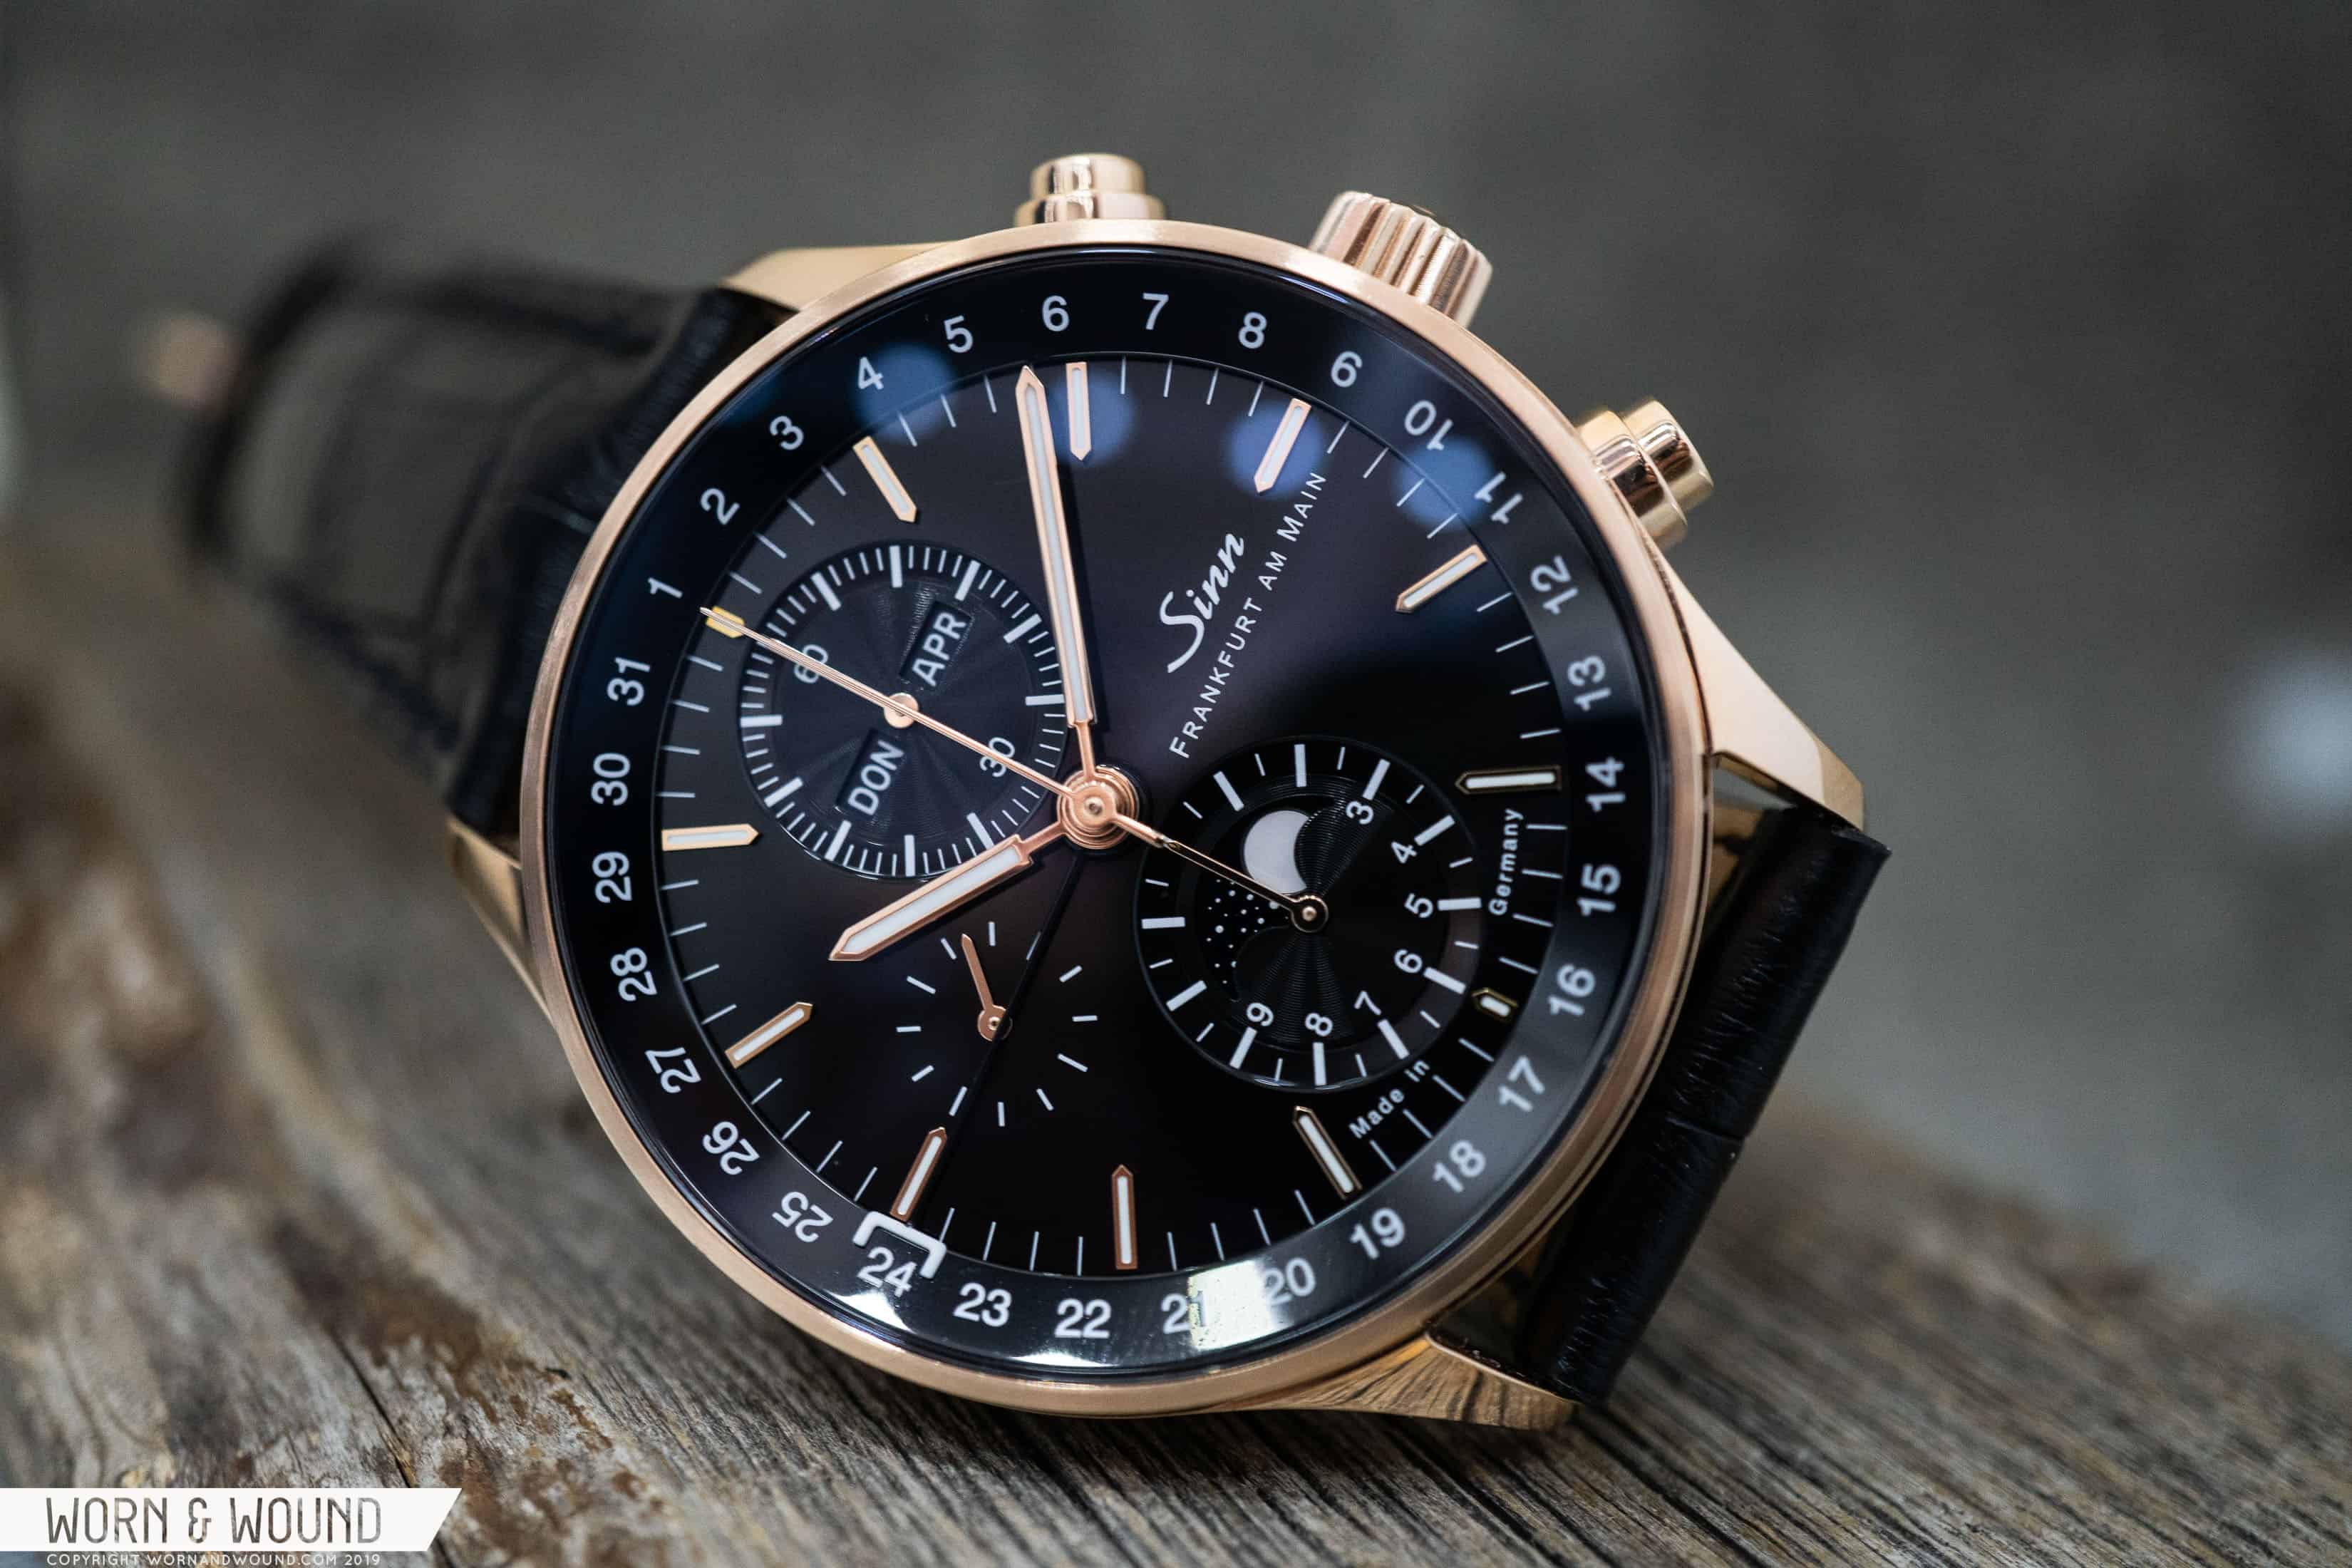 Baselworld 2019: First Look at the Sinn Frankfurt Financial District Anniversary Collection